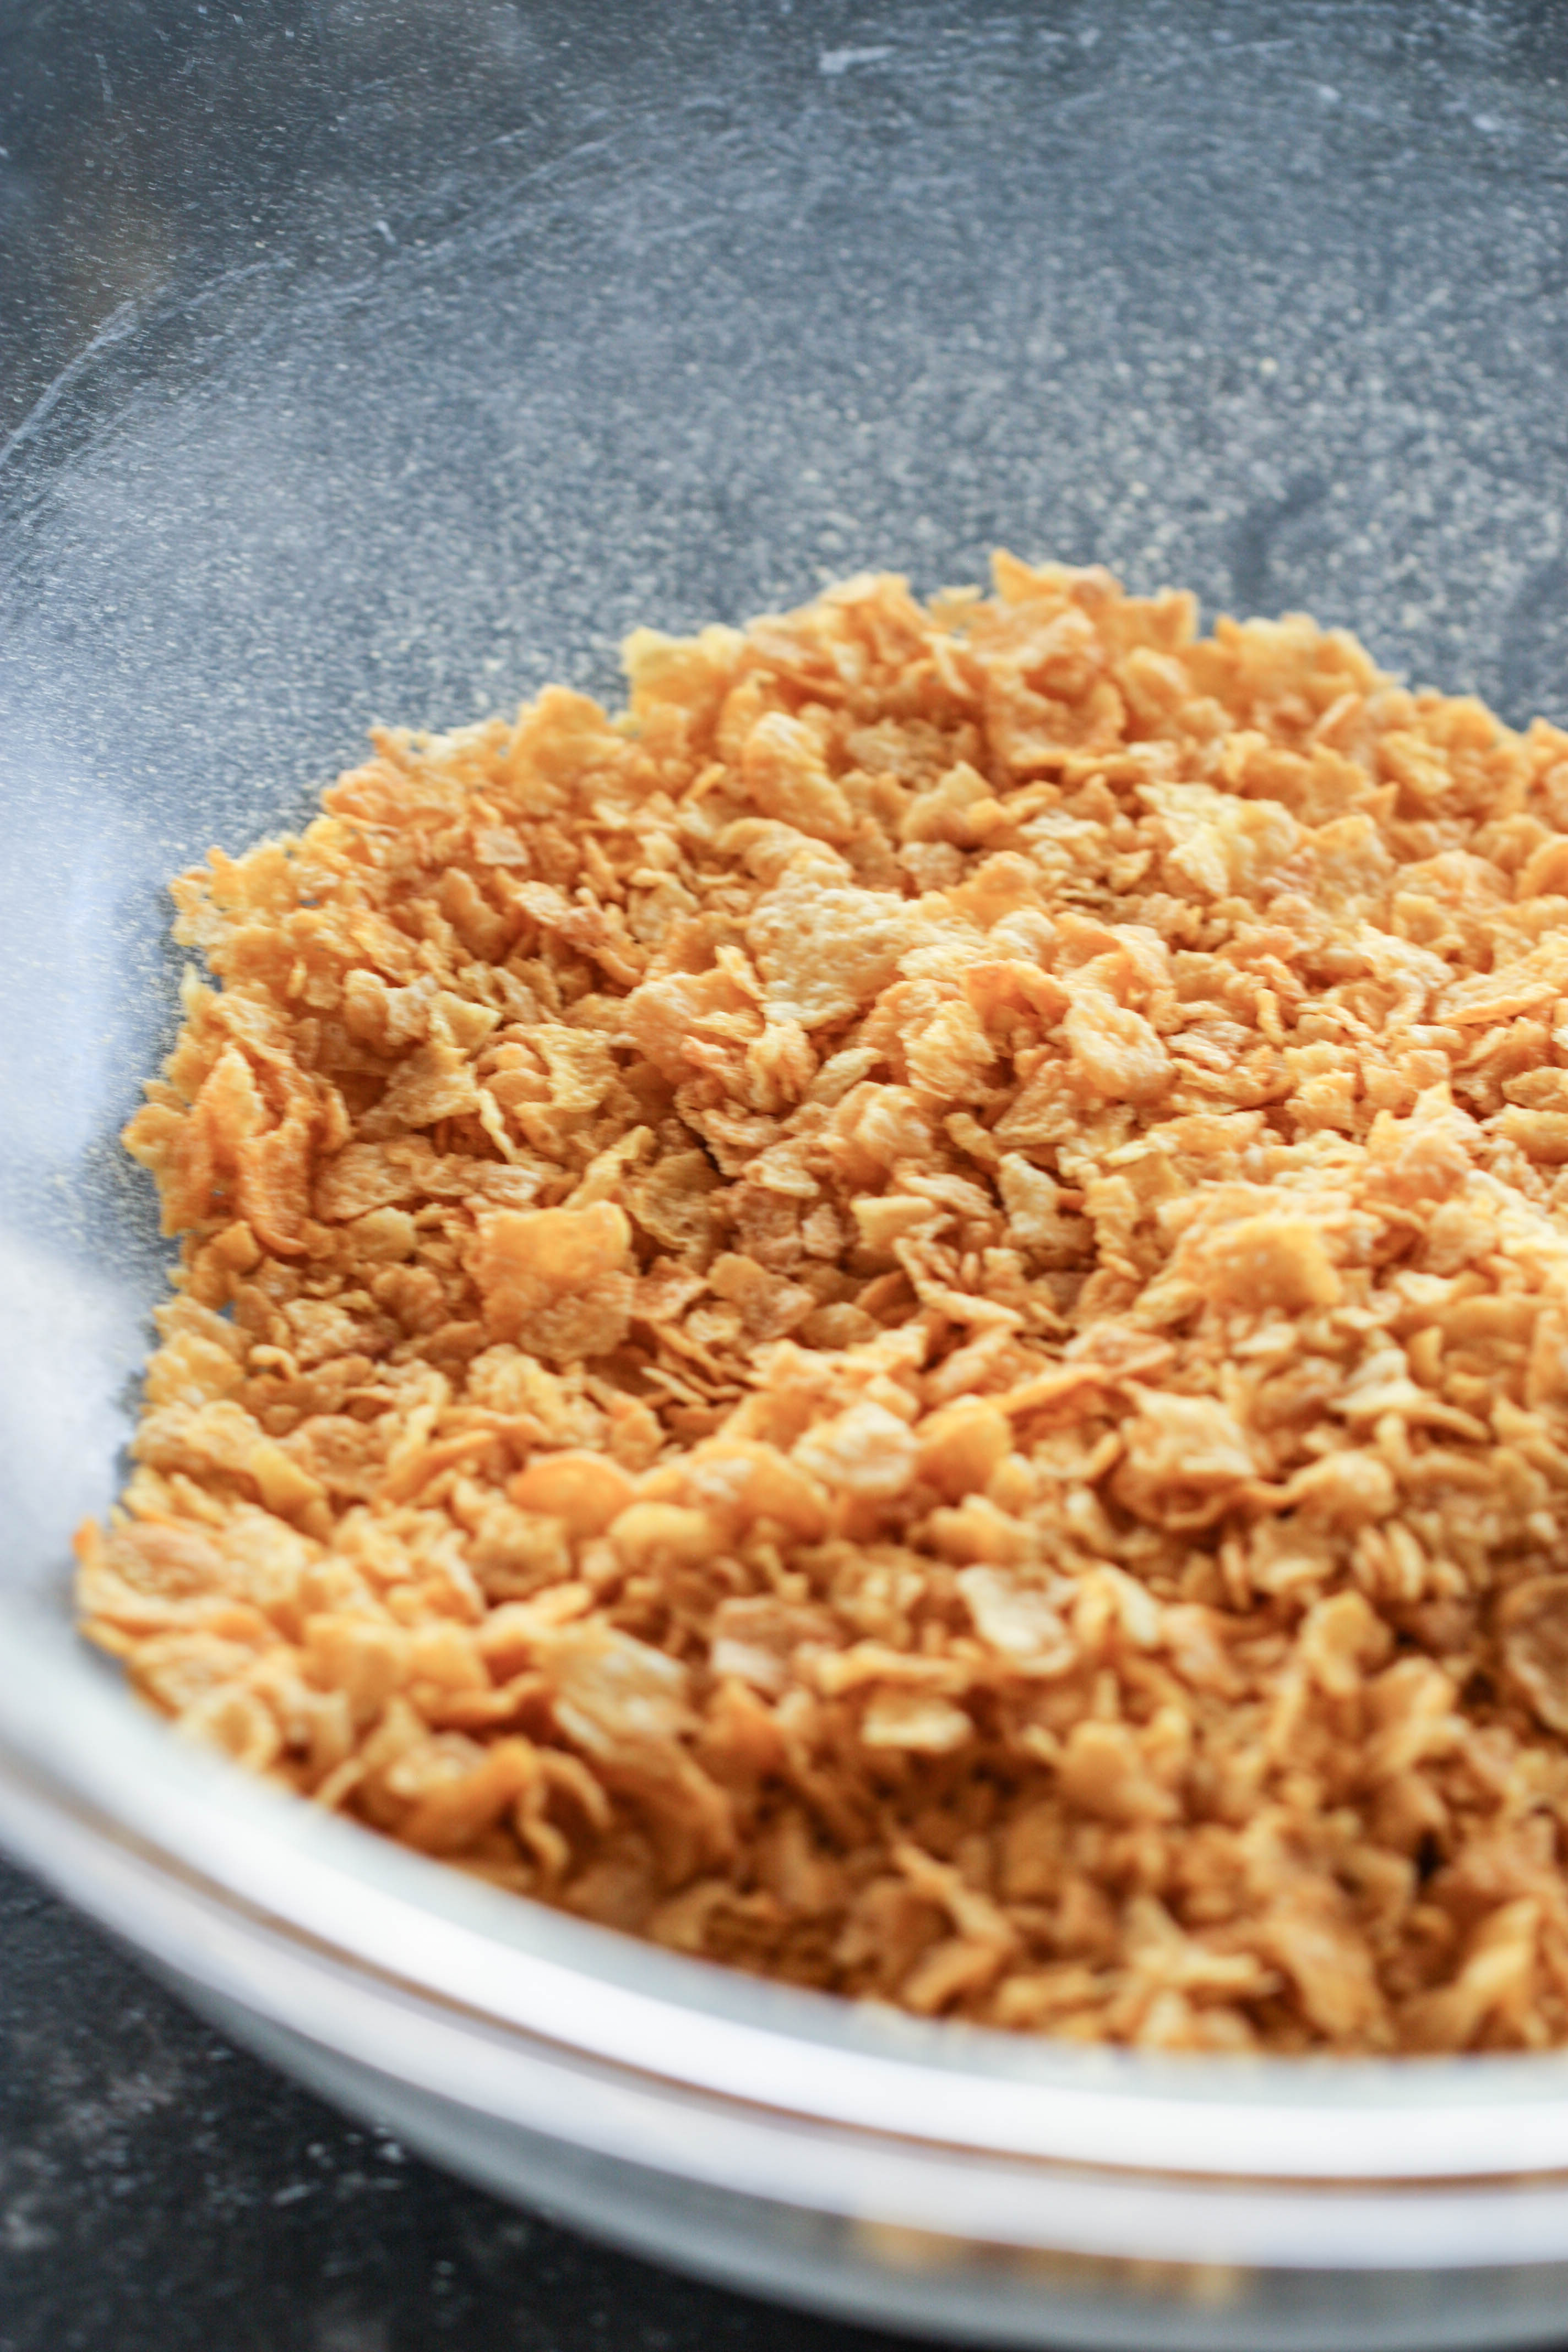 Crushed corn flakes in a bowl